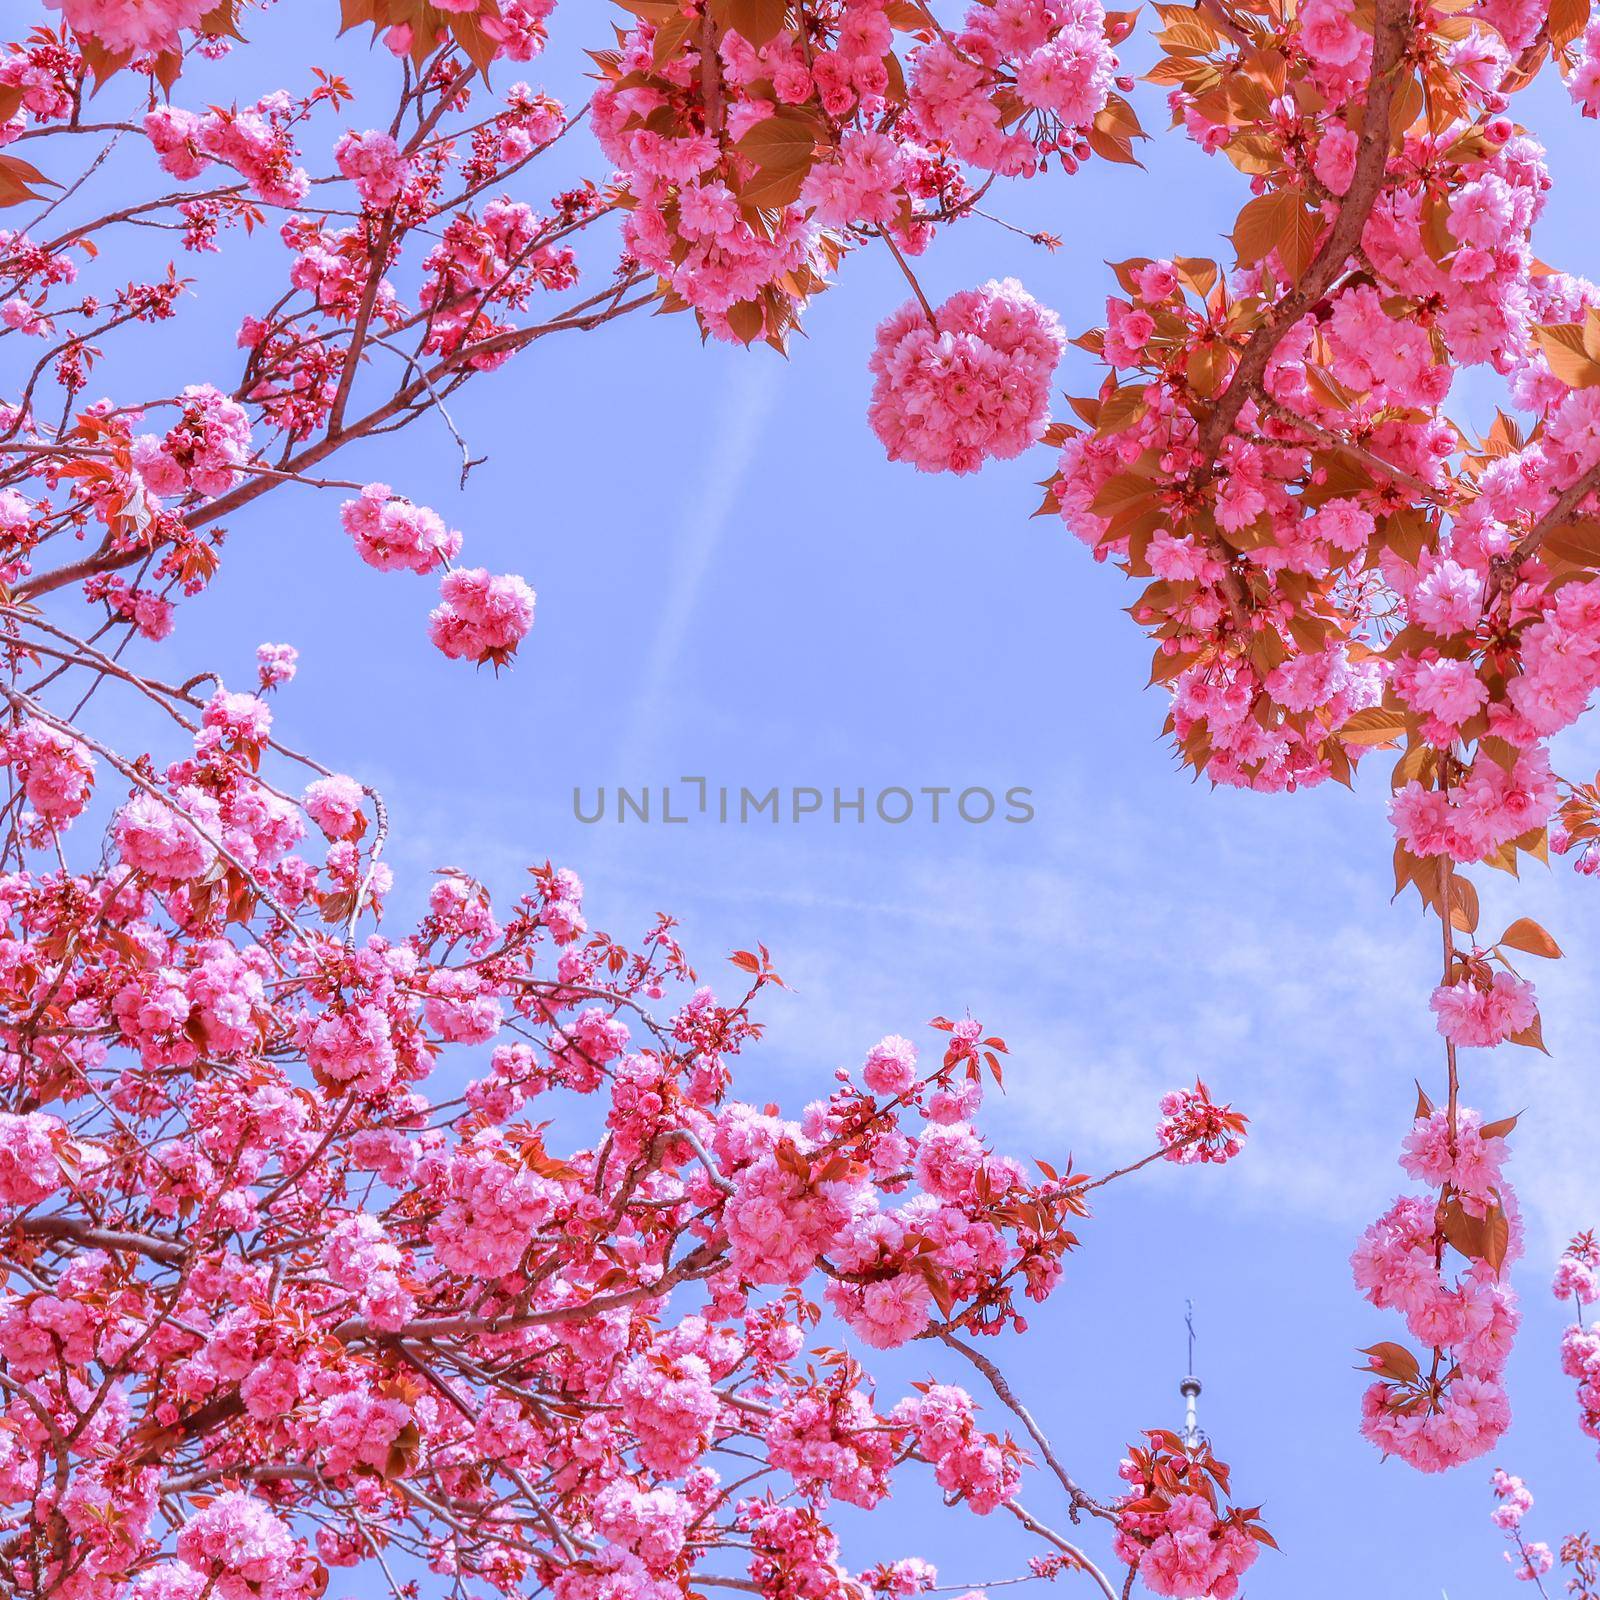 Beautiful sakura or cherry trees with pink flowers in spring against blue sky